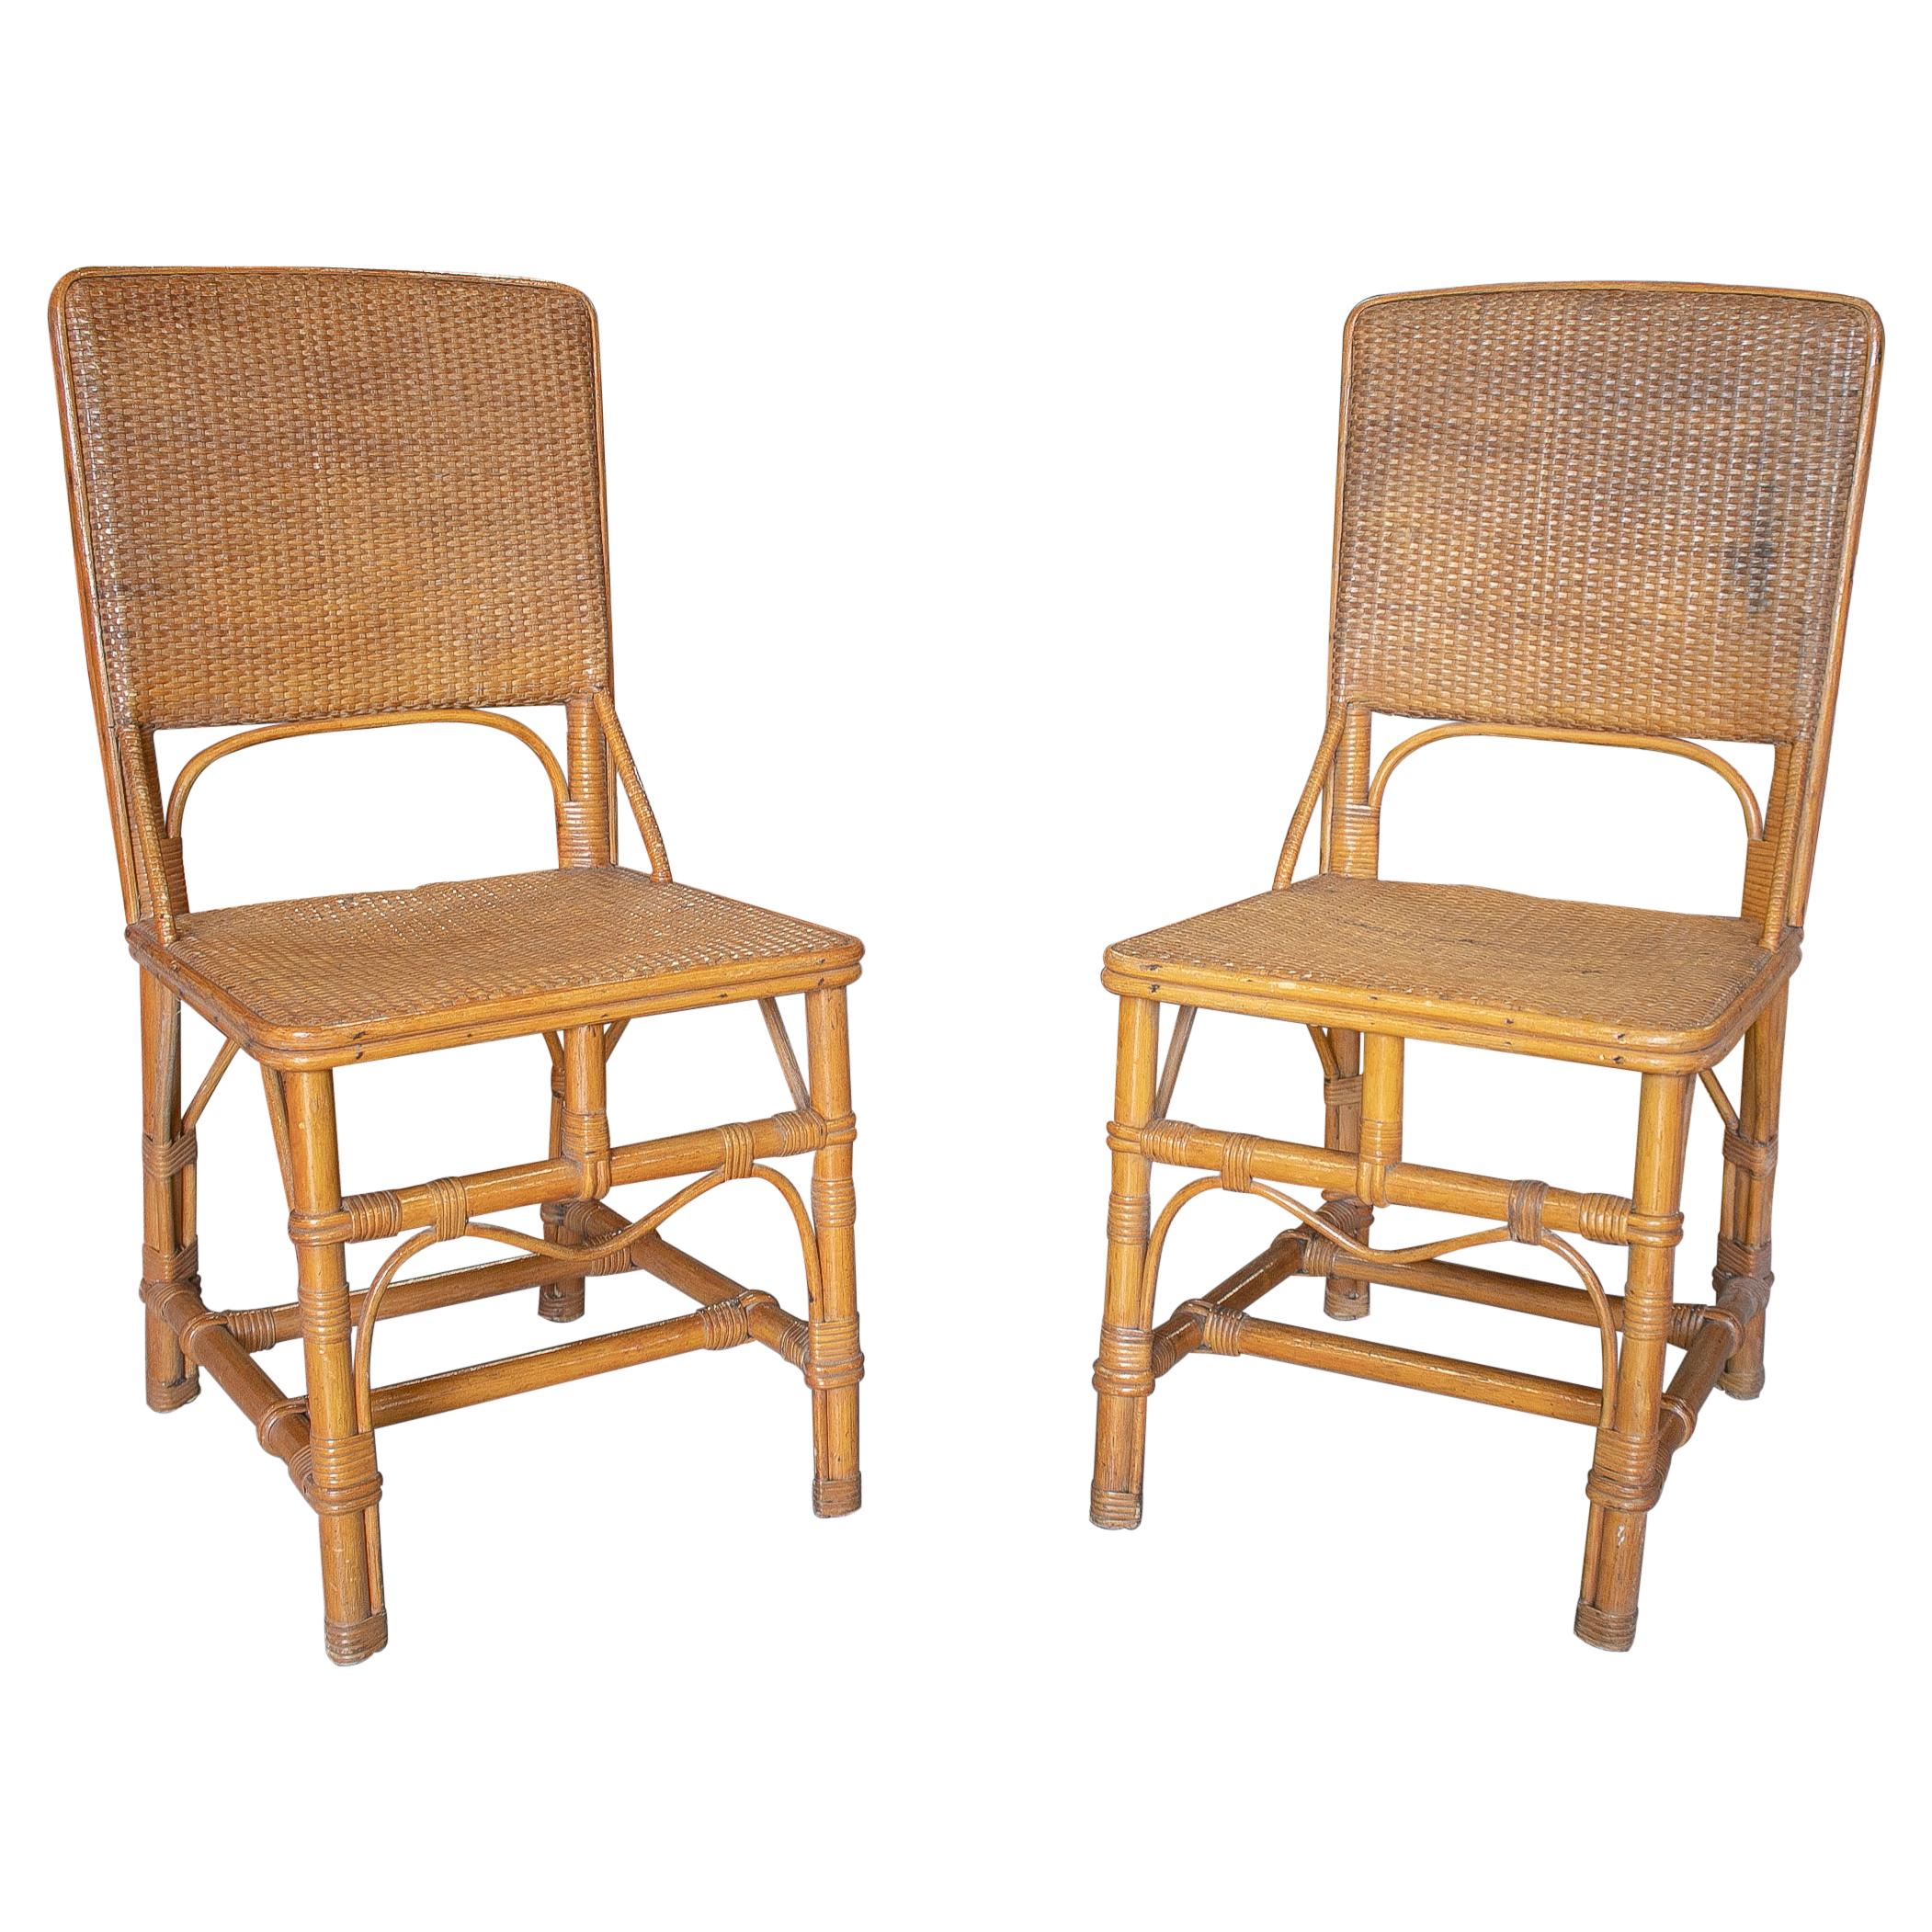 Pair of 1970s Spanish Bamboo and Hand Woven Wicker Chairs